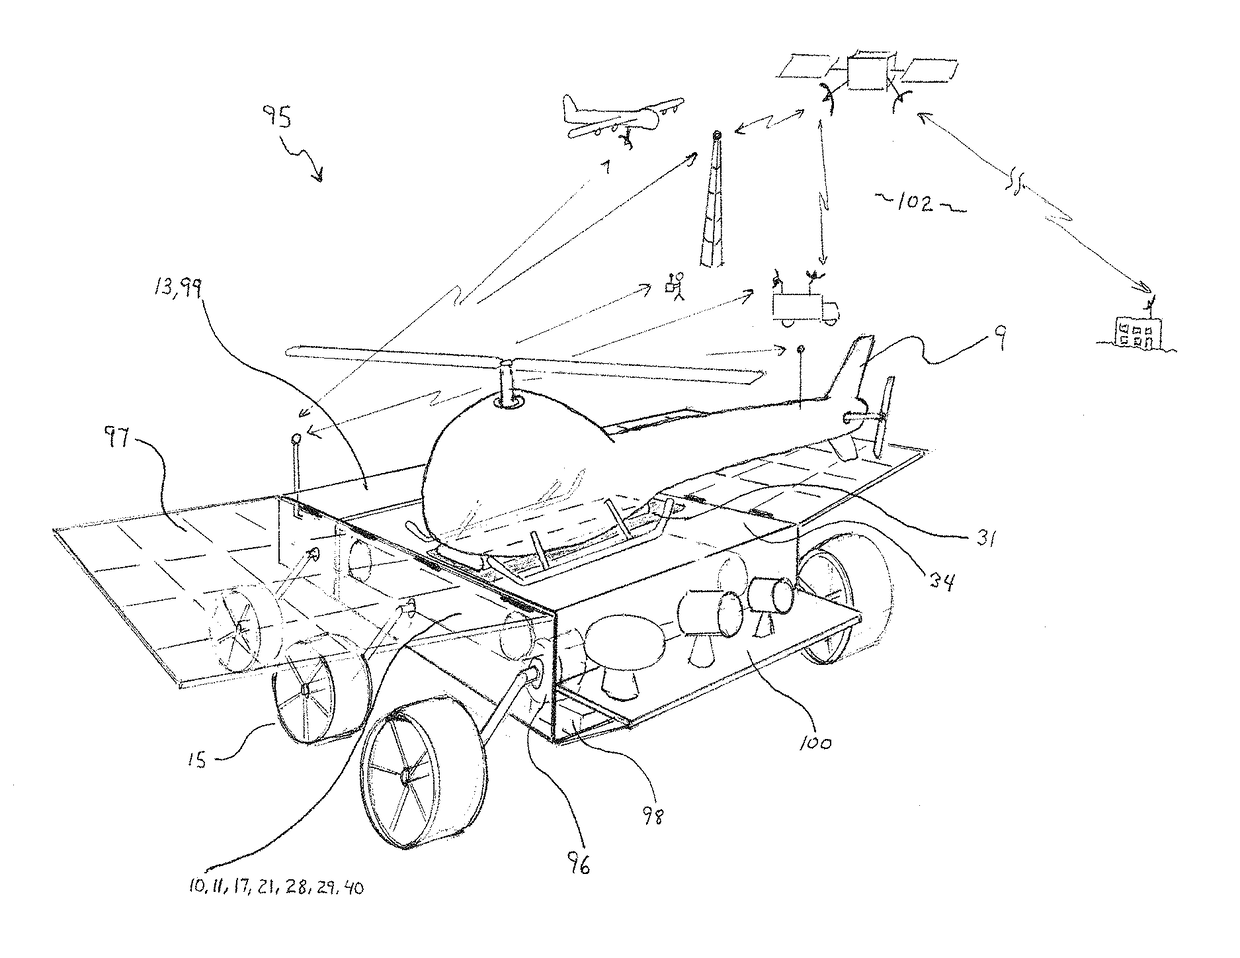 Device for refueling, exchanging, and charging power sources on remote controlled vehicles, UAVs, drones, or any type of robotic vehicle or machine with mobility